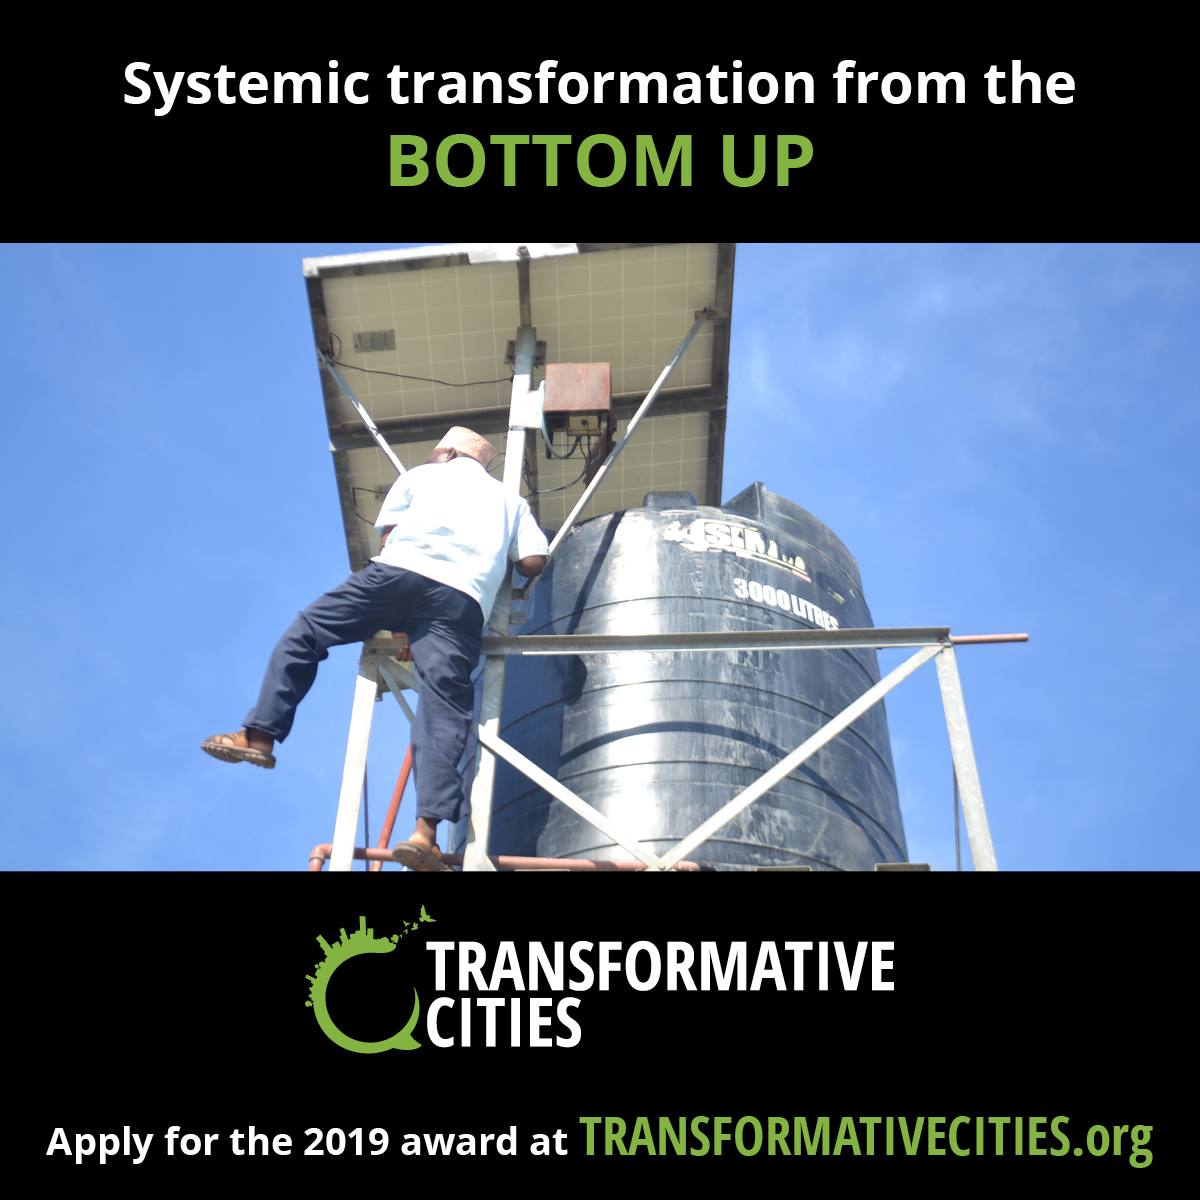 Open Call for the Transformative Cities Award 2019